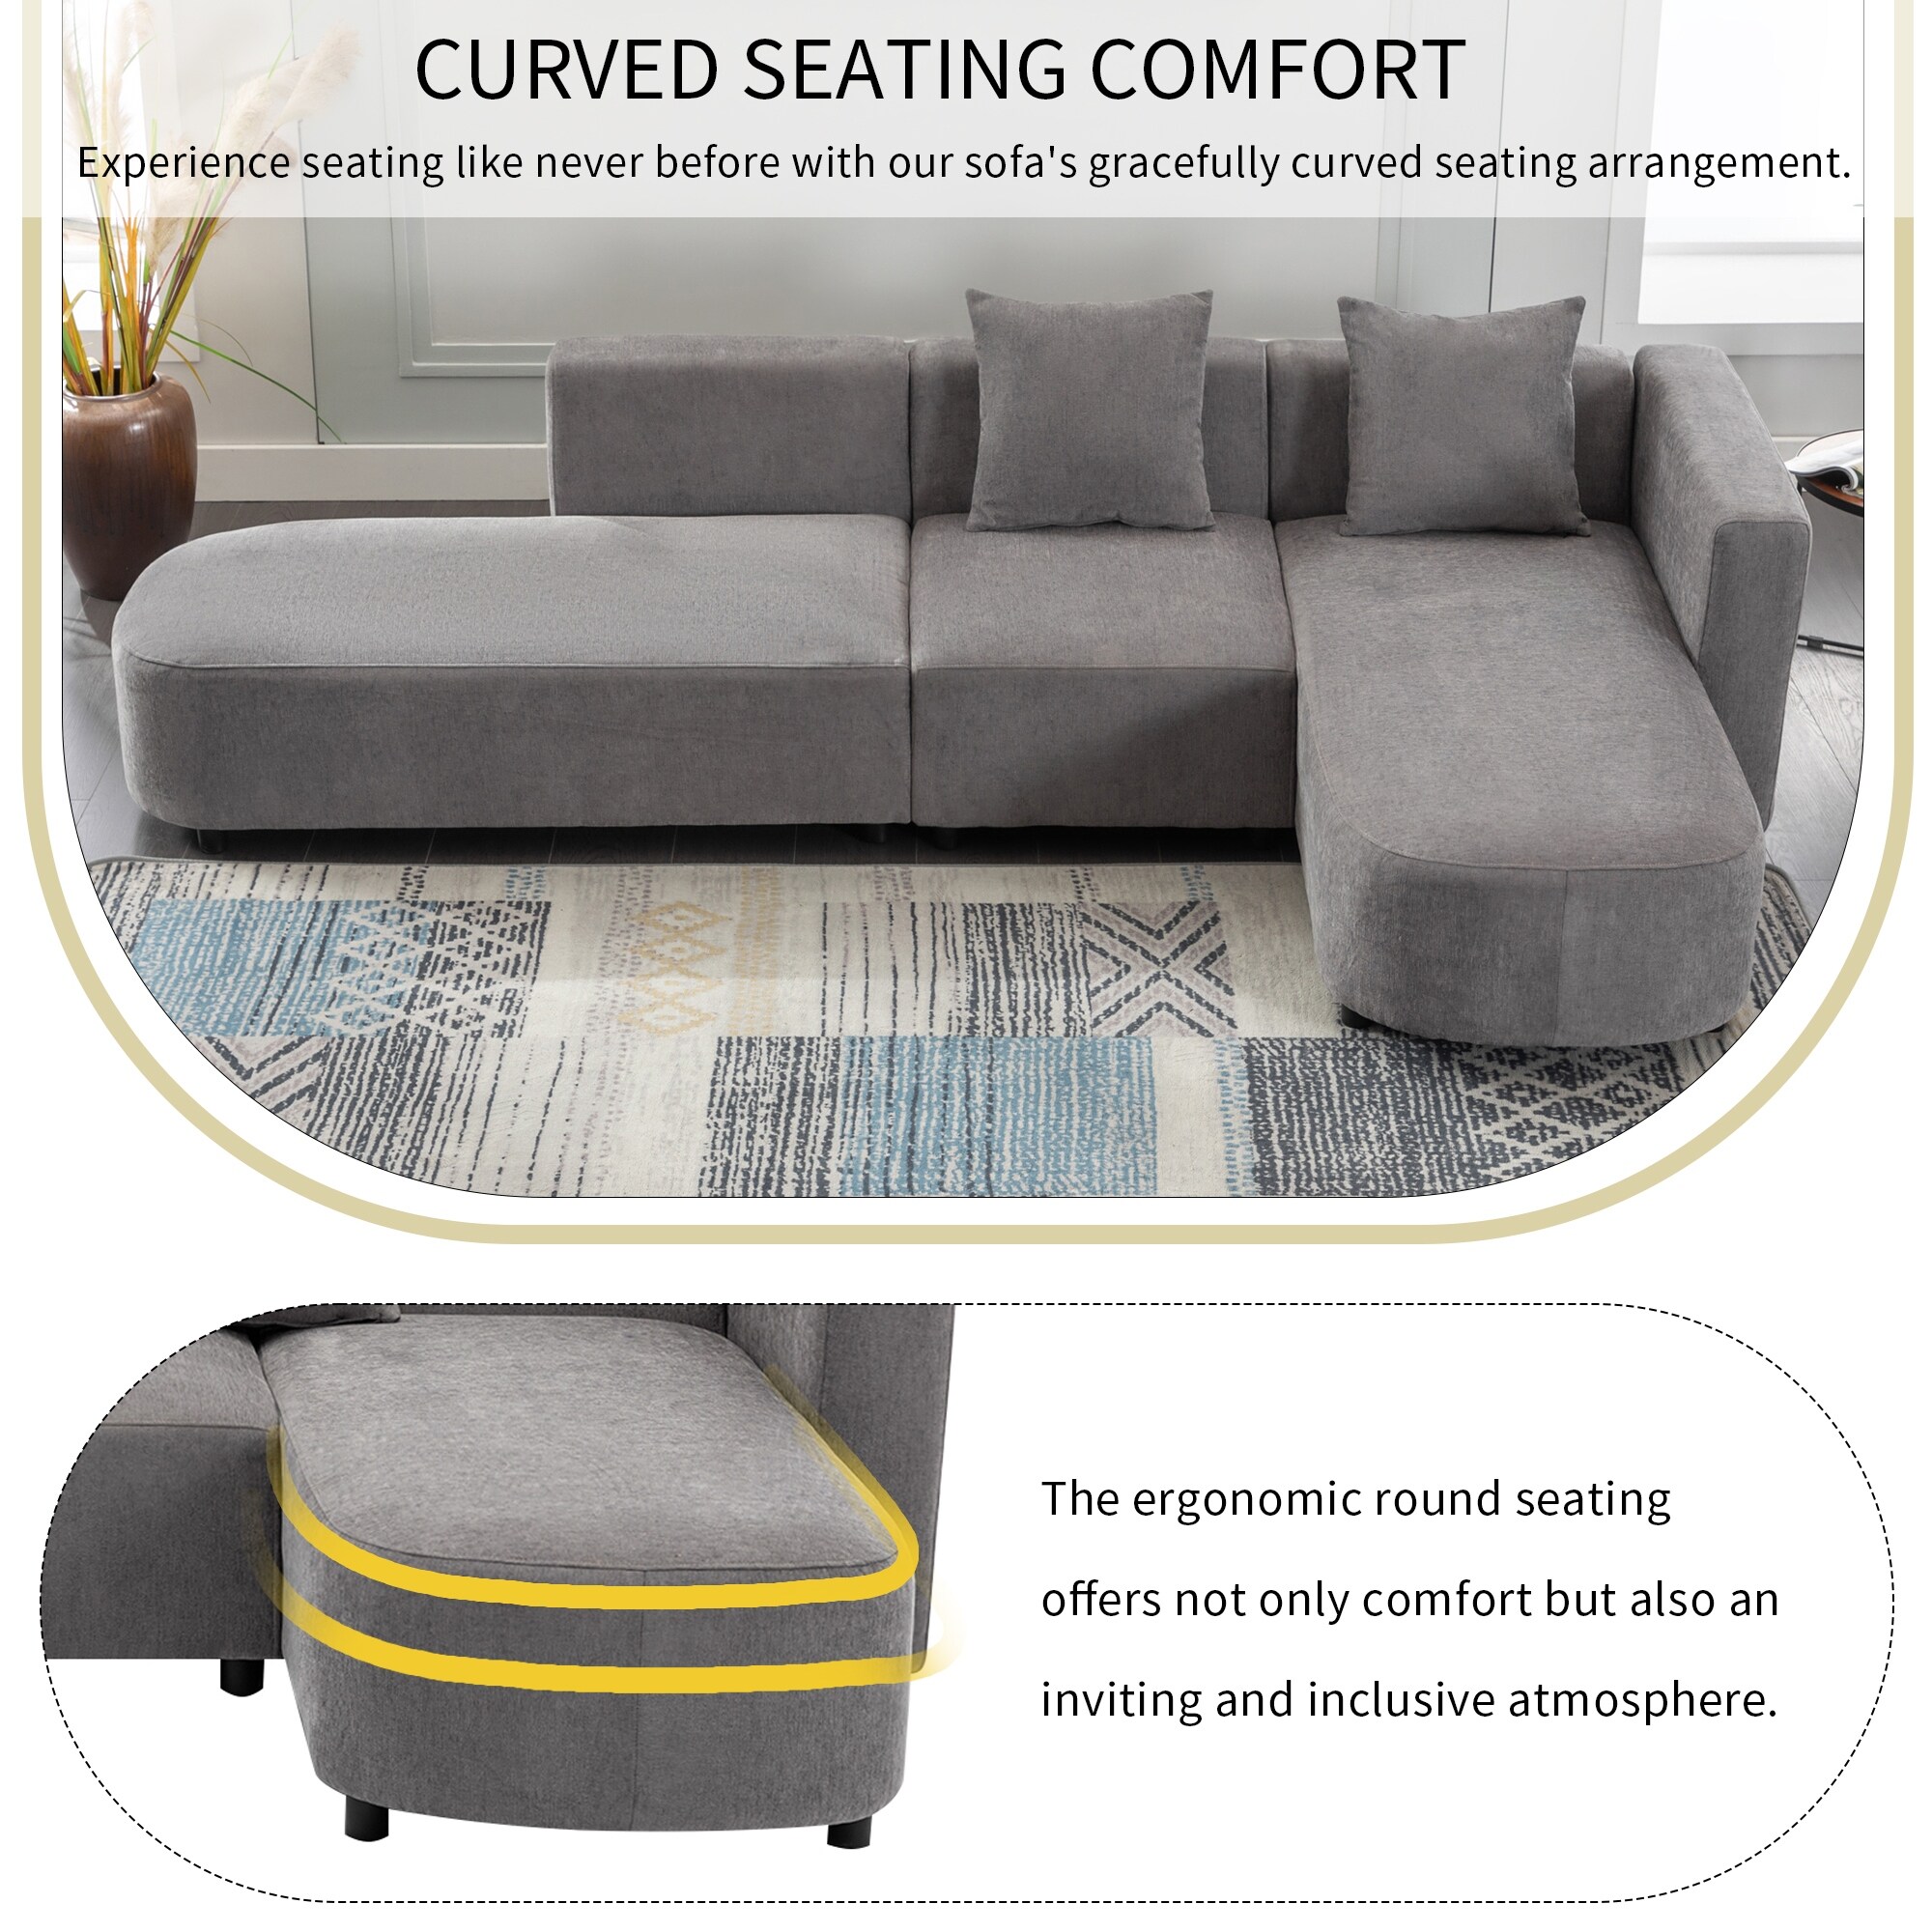 https://ak1.ostkcdn.com/images/products/is/images/direct/ca7d41441724def5f498f843fb53dbcd0dfce9fd/Grey-3-seats-L-Style-Luxury-Modern-Style-Living-Room-Upholstery-Sofa%2C-with-Soft-Seat-Cushions-and-Two-Pillows.jpg